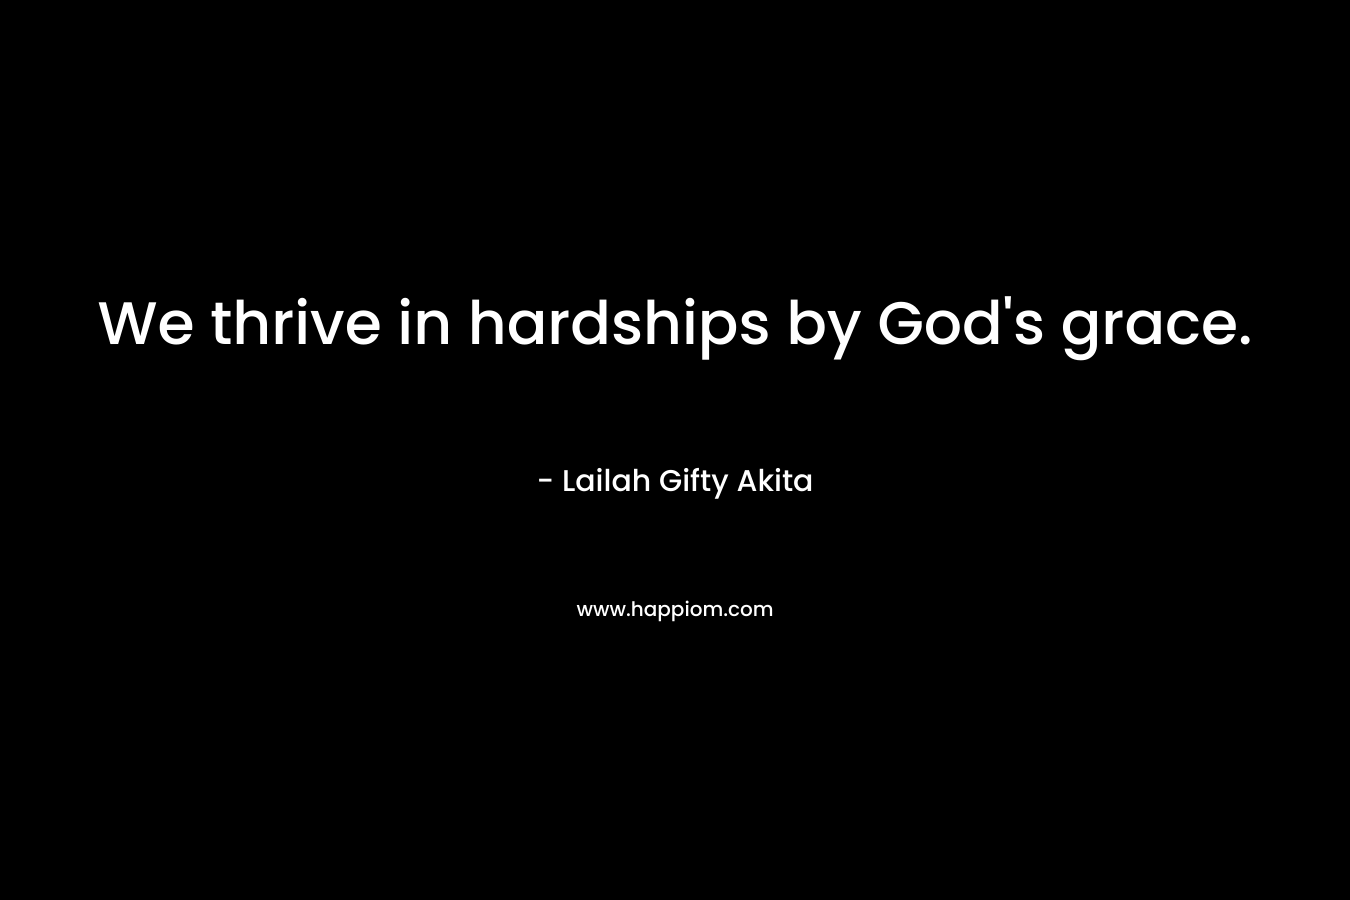 We thrive in hardships by God’s grace. – Lailah Gifty Akita